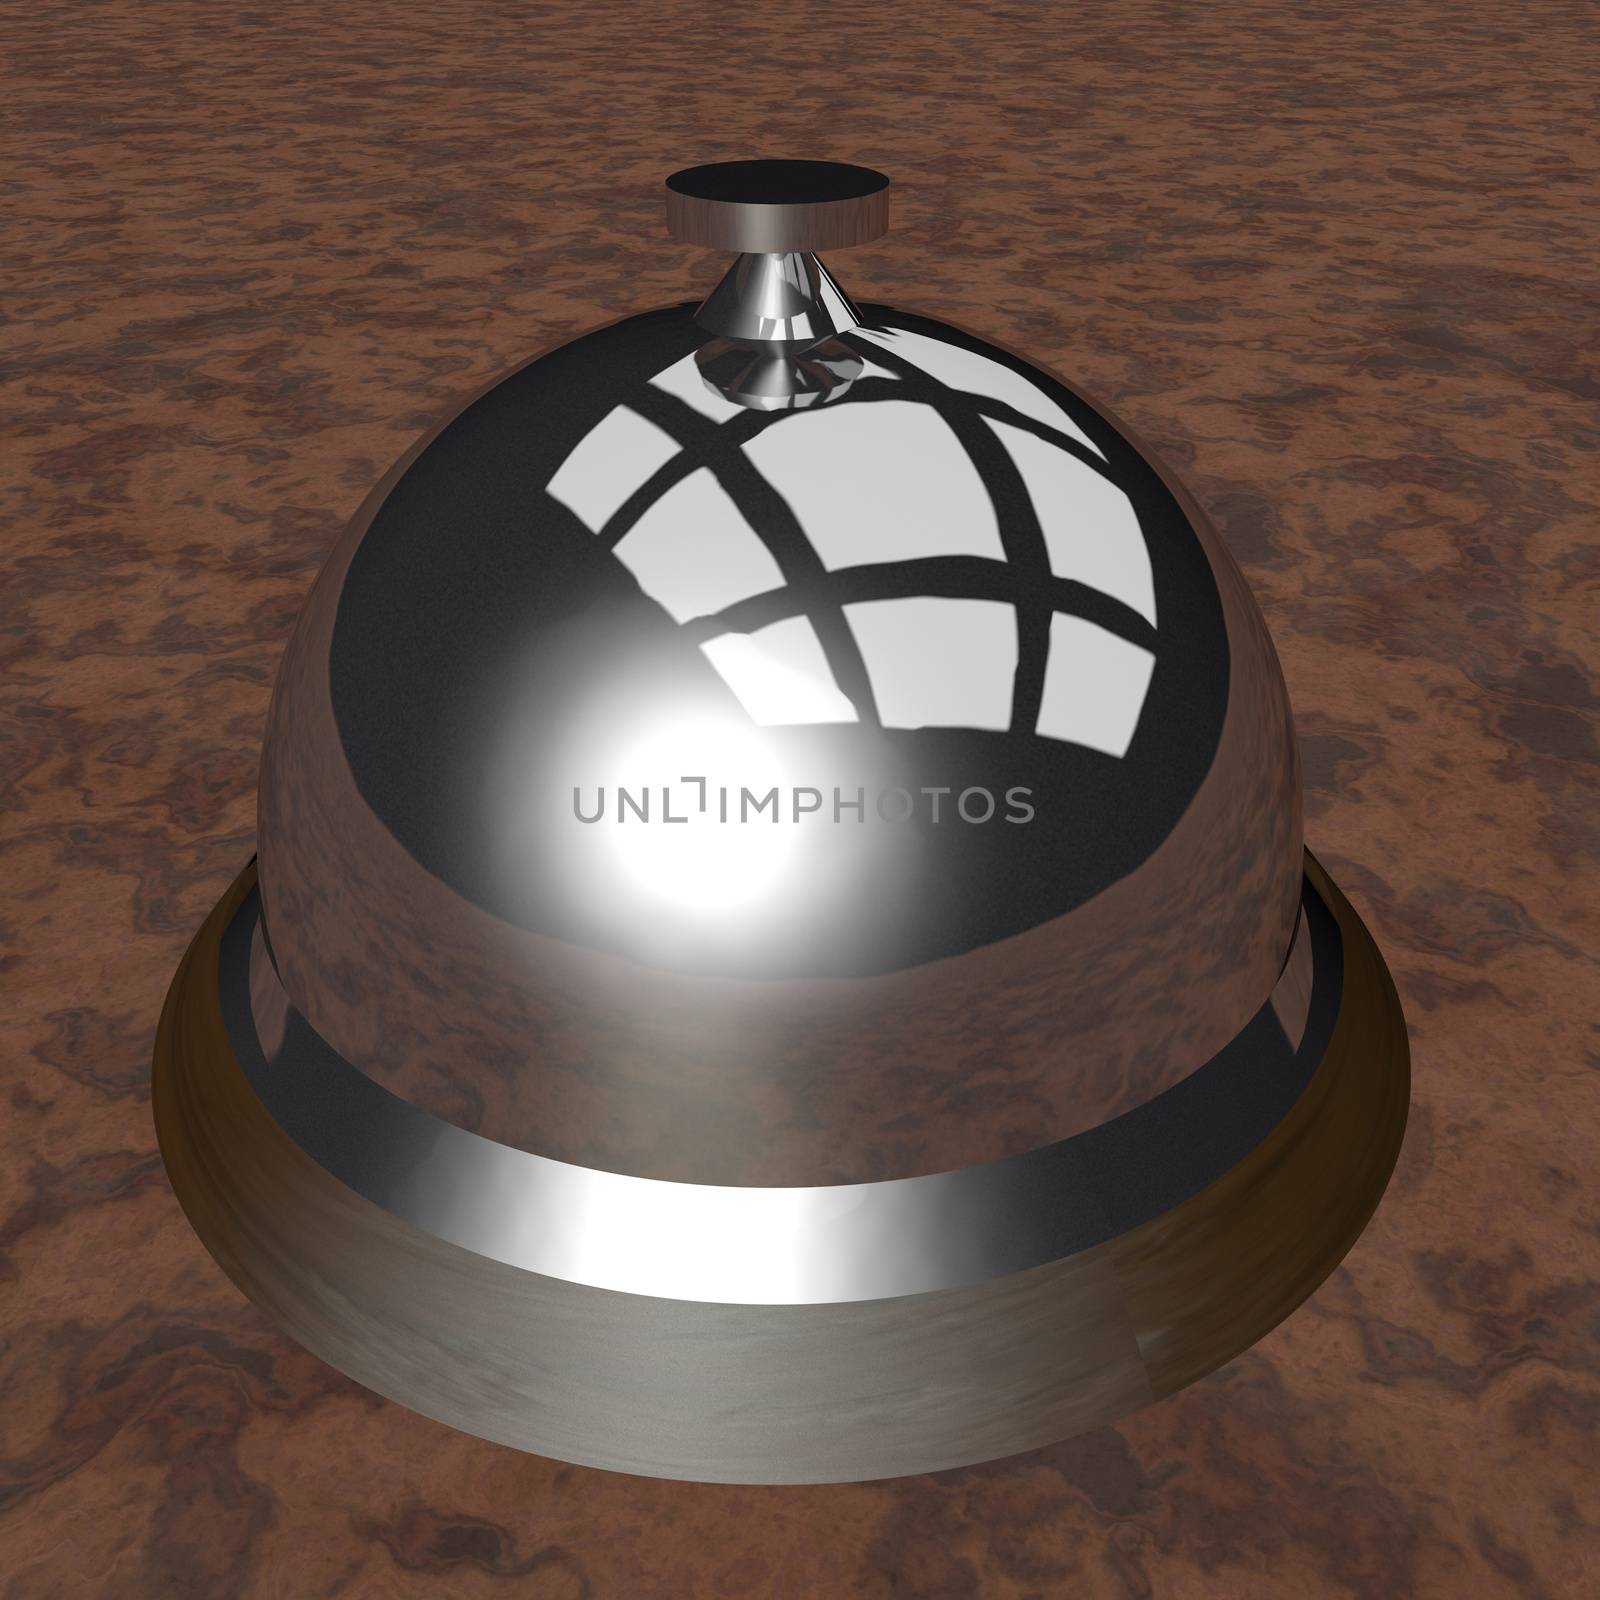 Table bell over wooden surface, 3d render